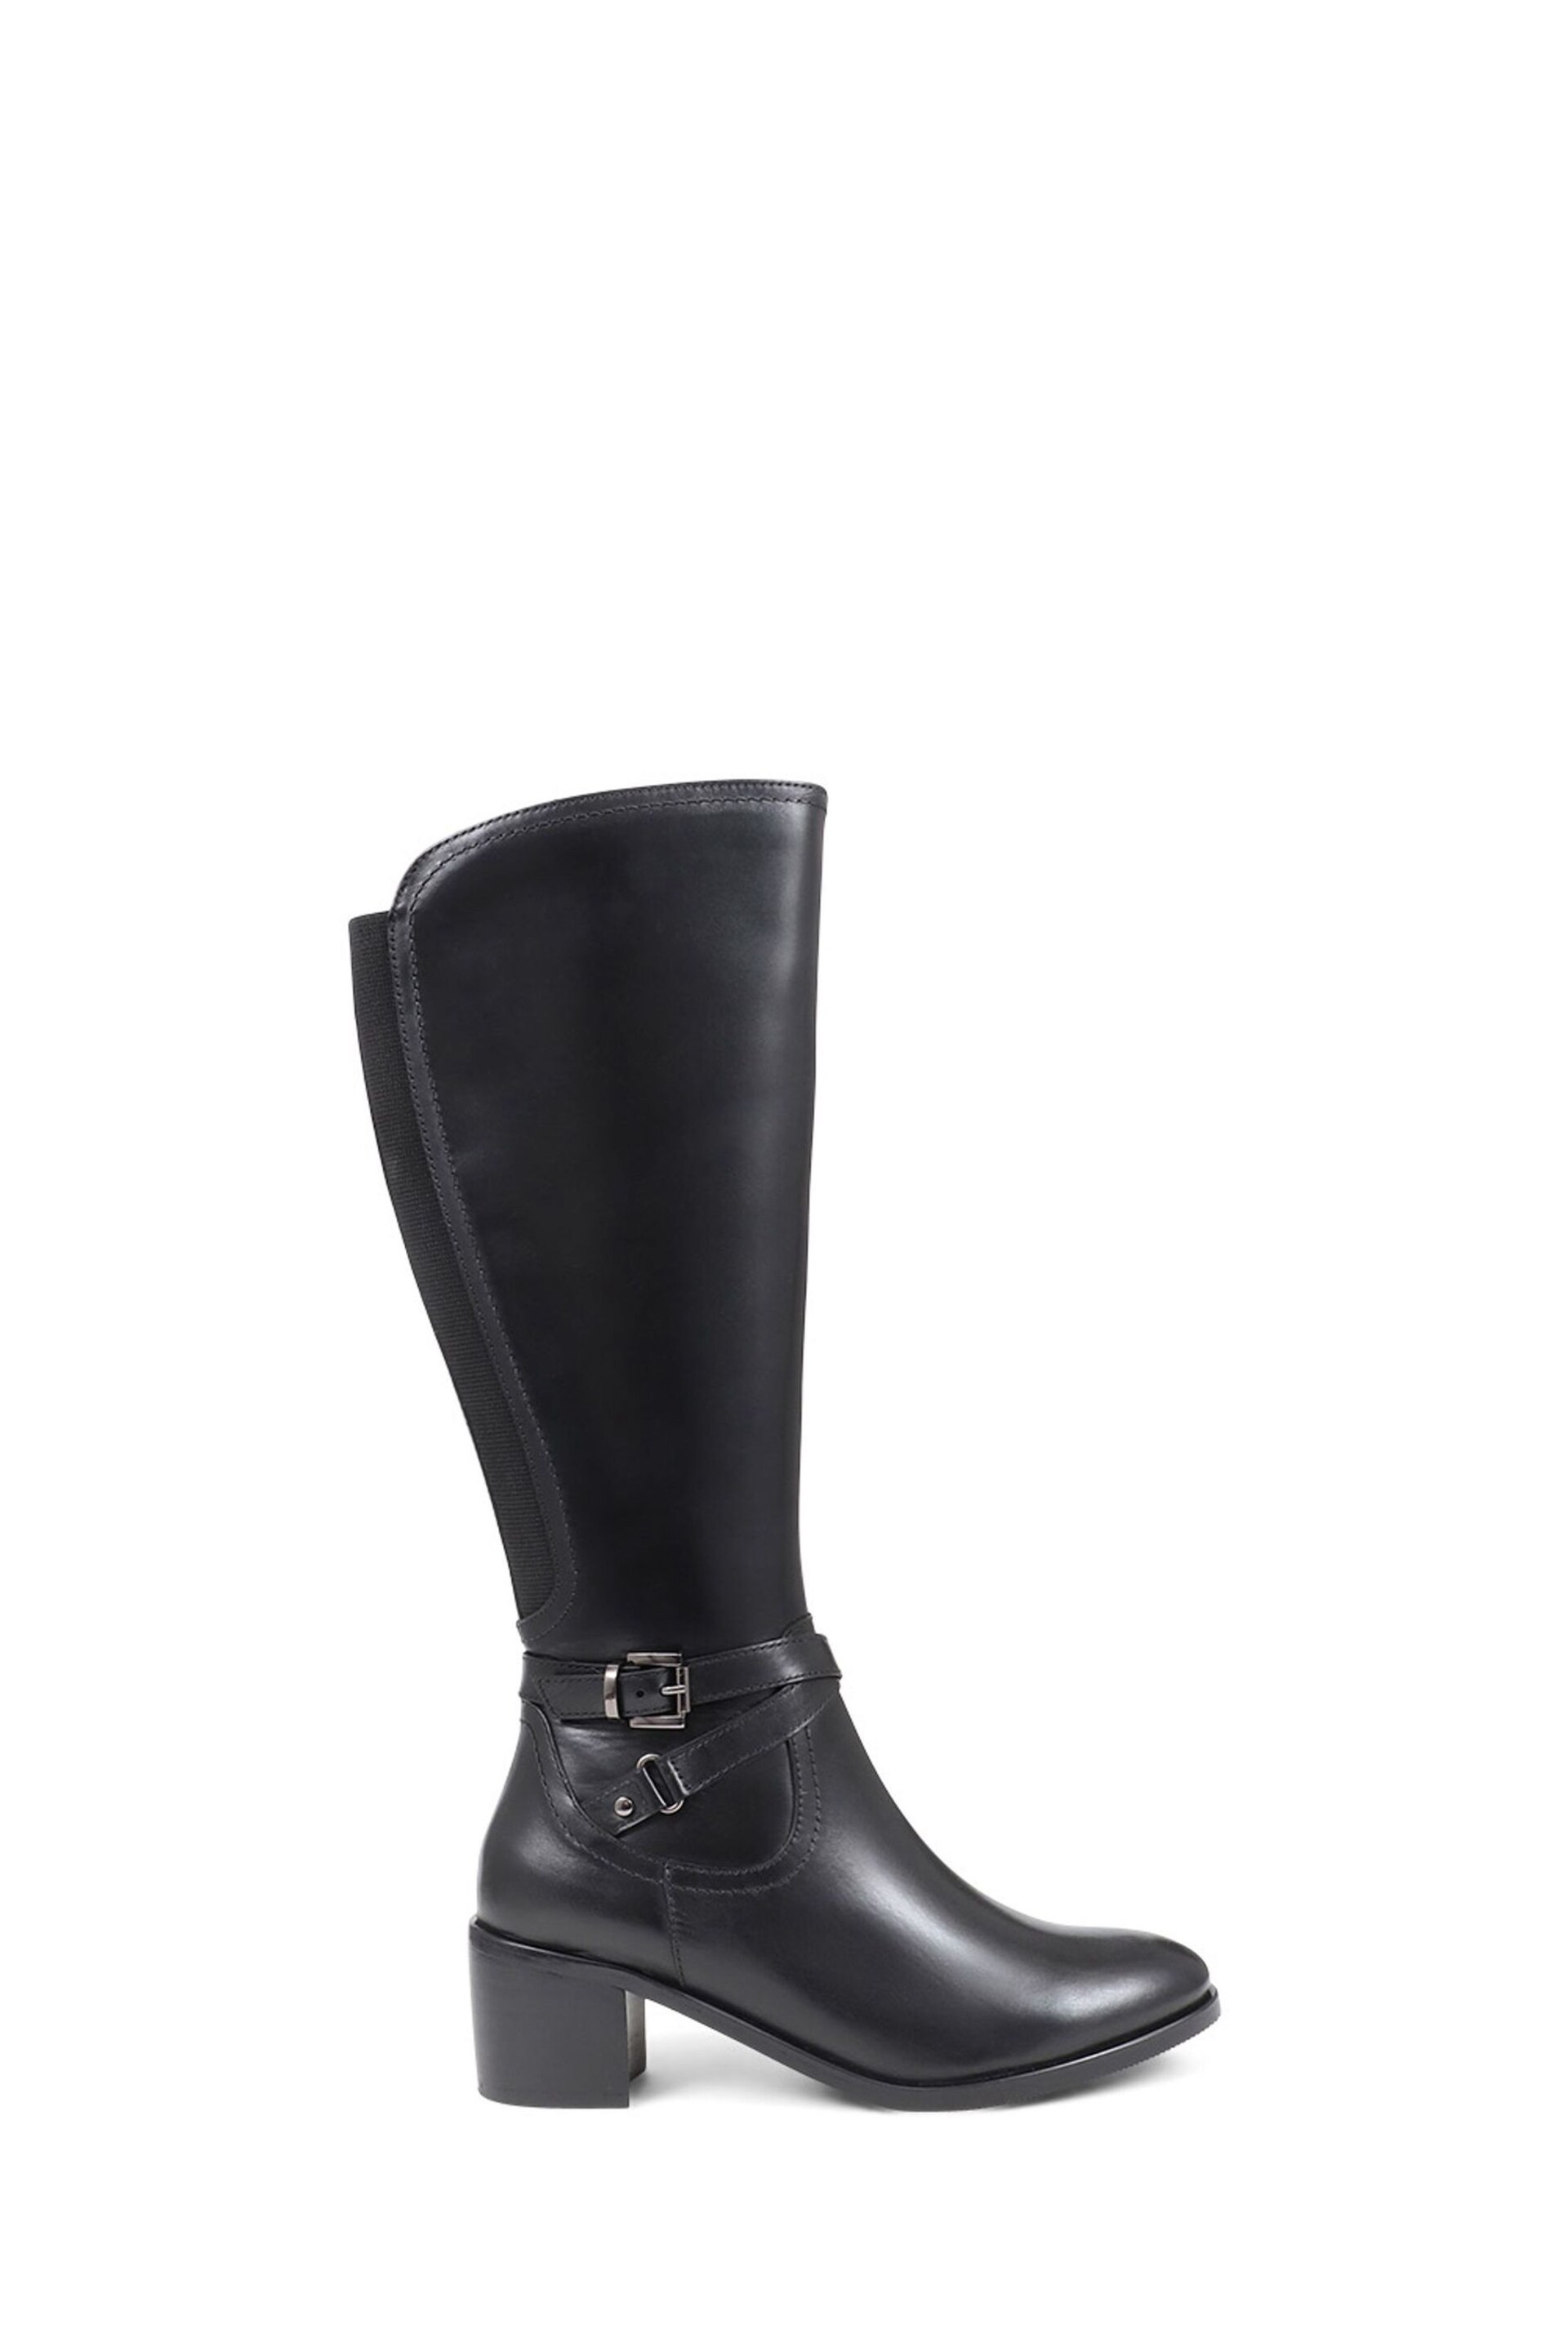 Pavers Smart Tall Black Heeled Boots - Image 1 of 5